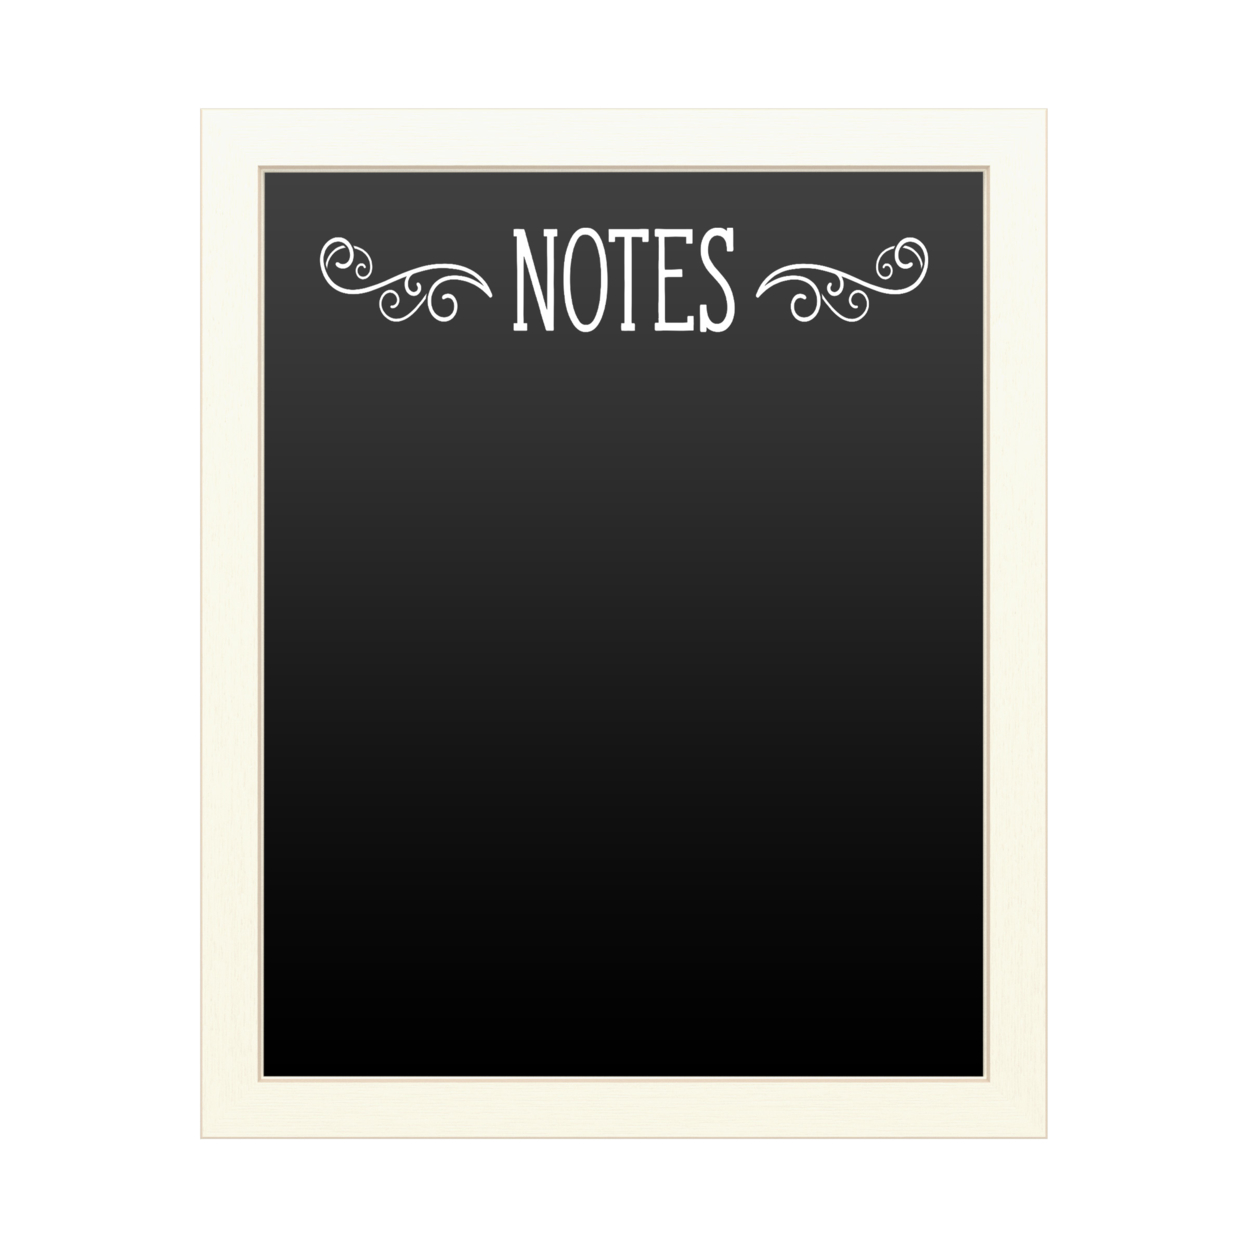 16 X 20 Chalk Board With Printed Artwork - Notes Serrif White Board - Ready To Hang Chalkboard